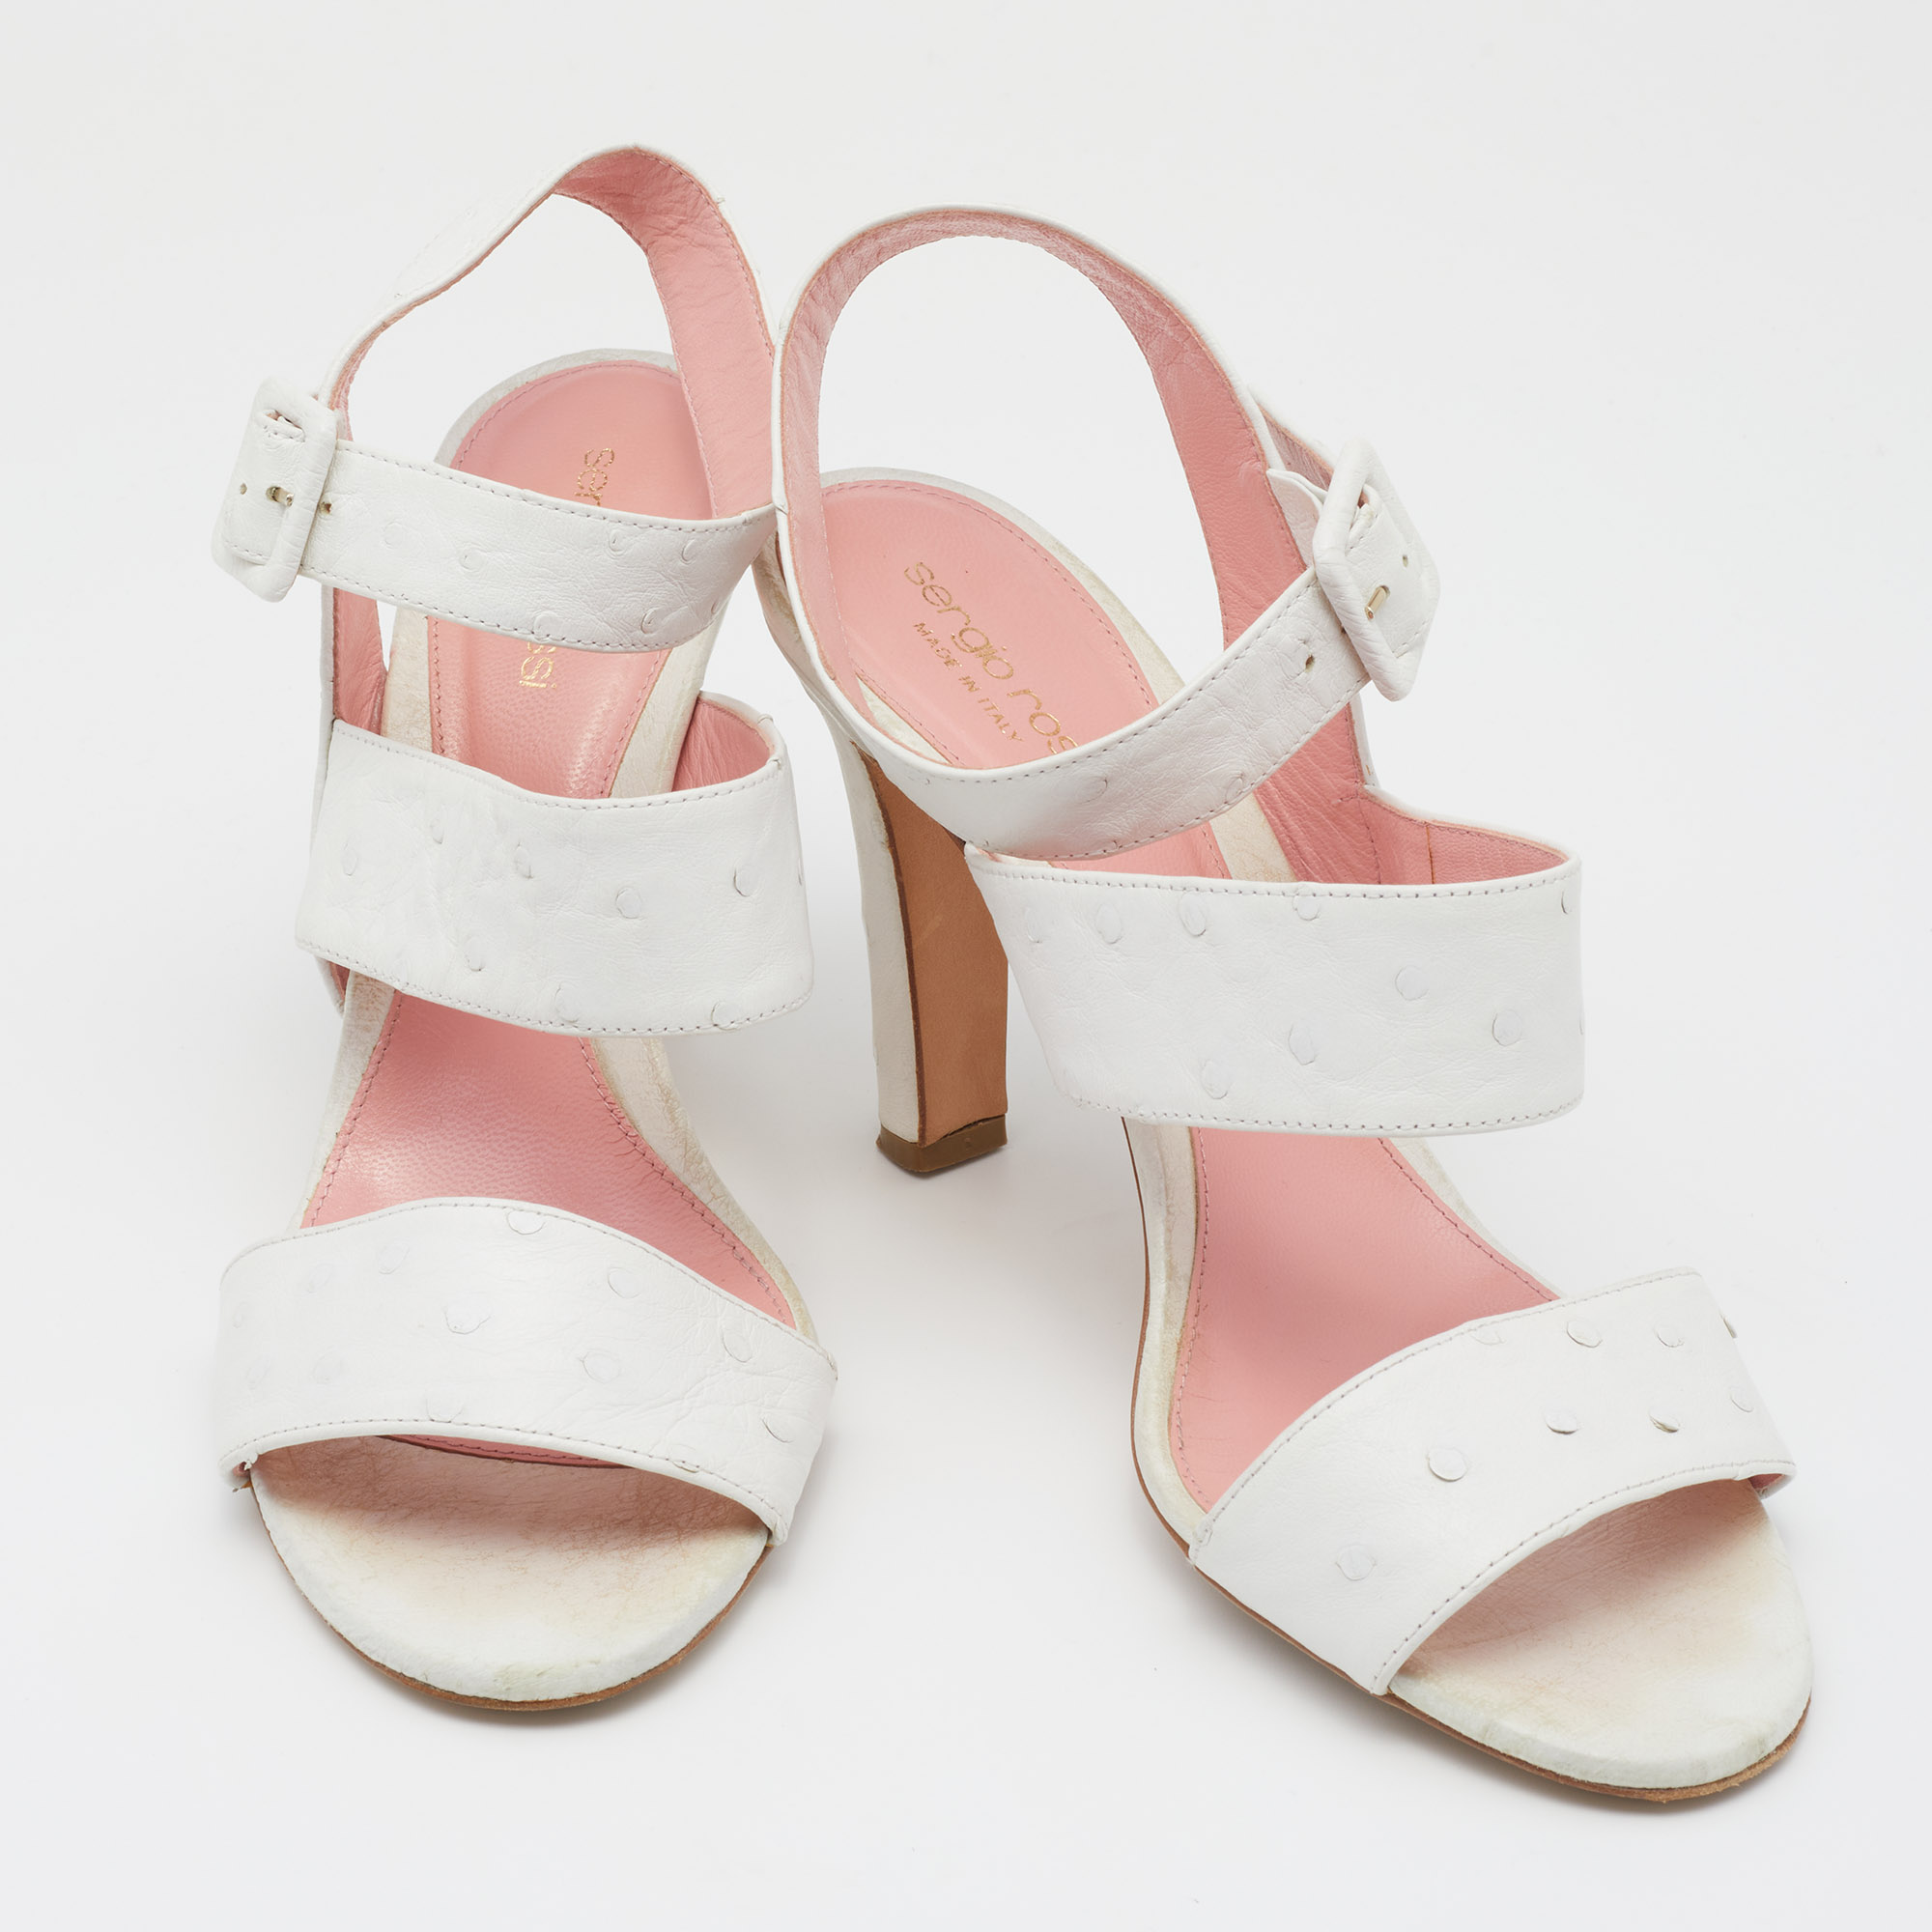 Sergio Rossi White Ostrich Leather Ankle Strap Sandals Size 39